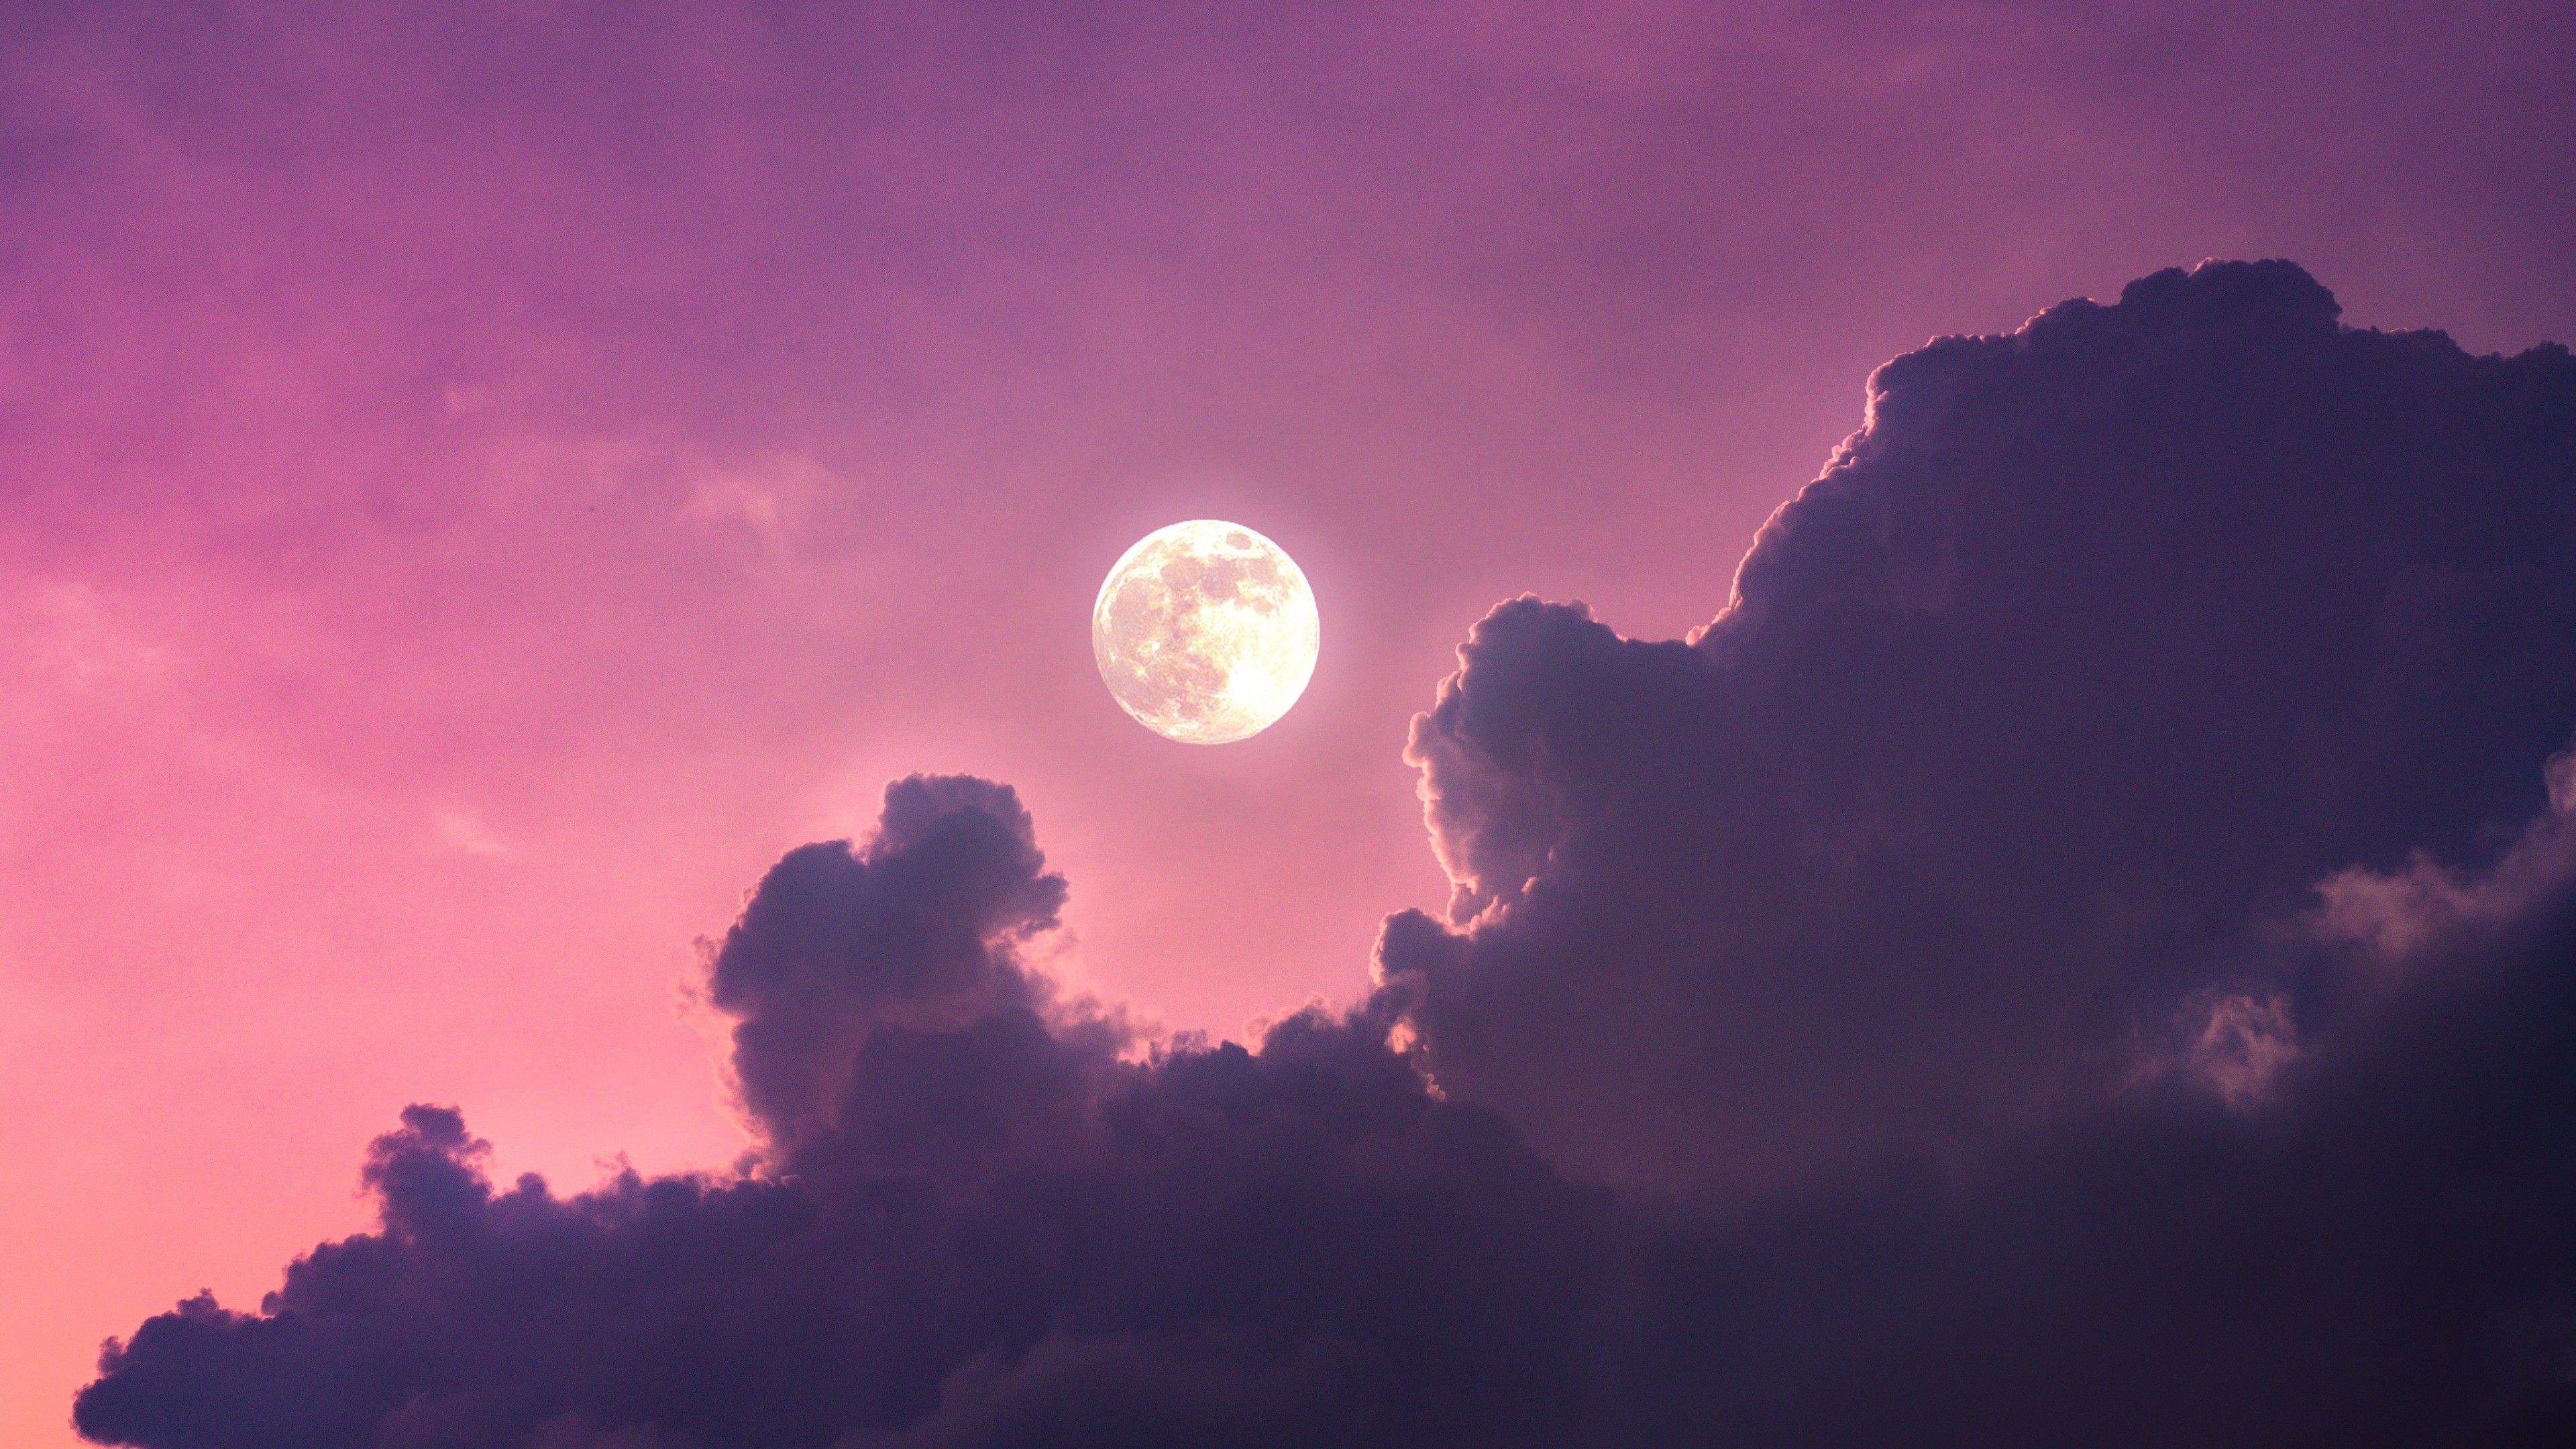 Full moon 4K Wallpaper, Clouds, Pink sky, Scenic, Aesthetic, Nature